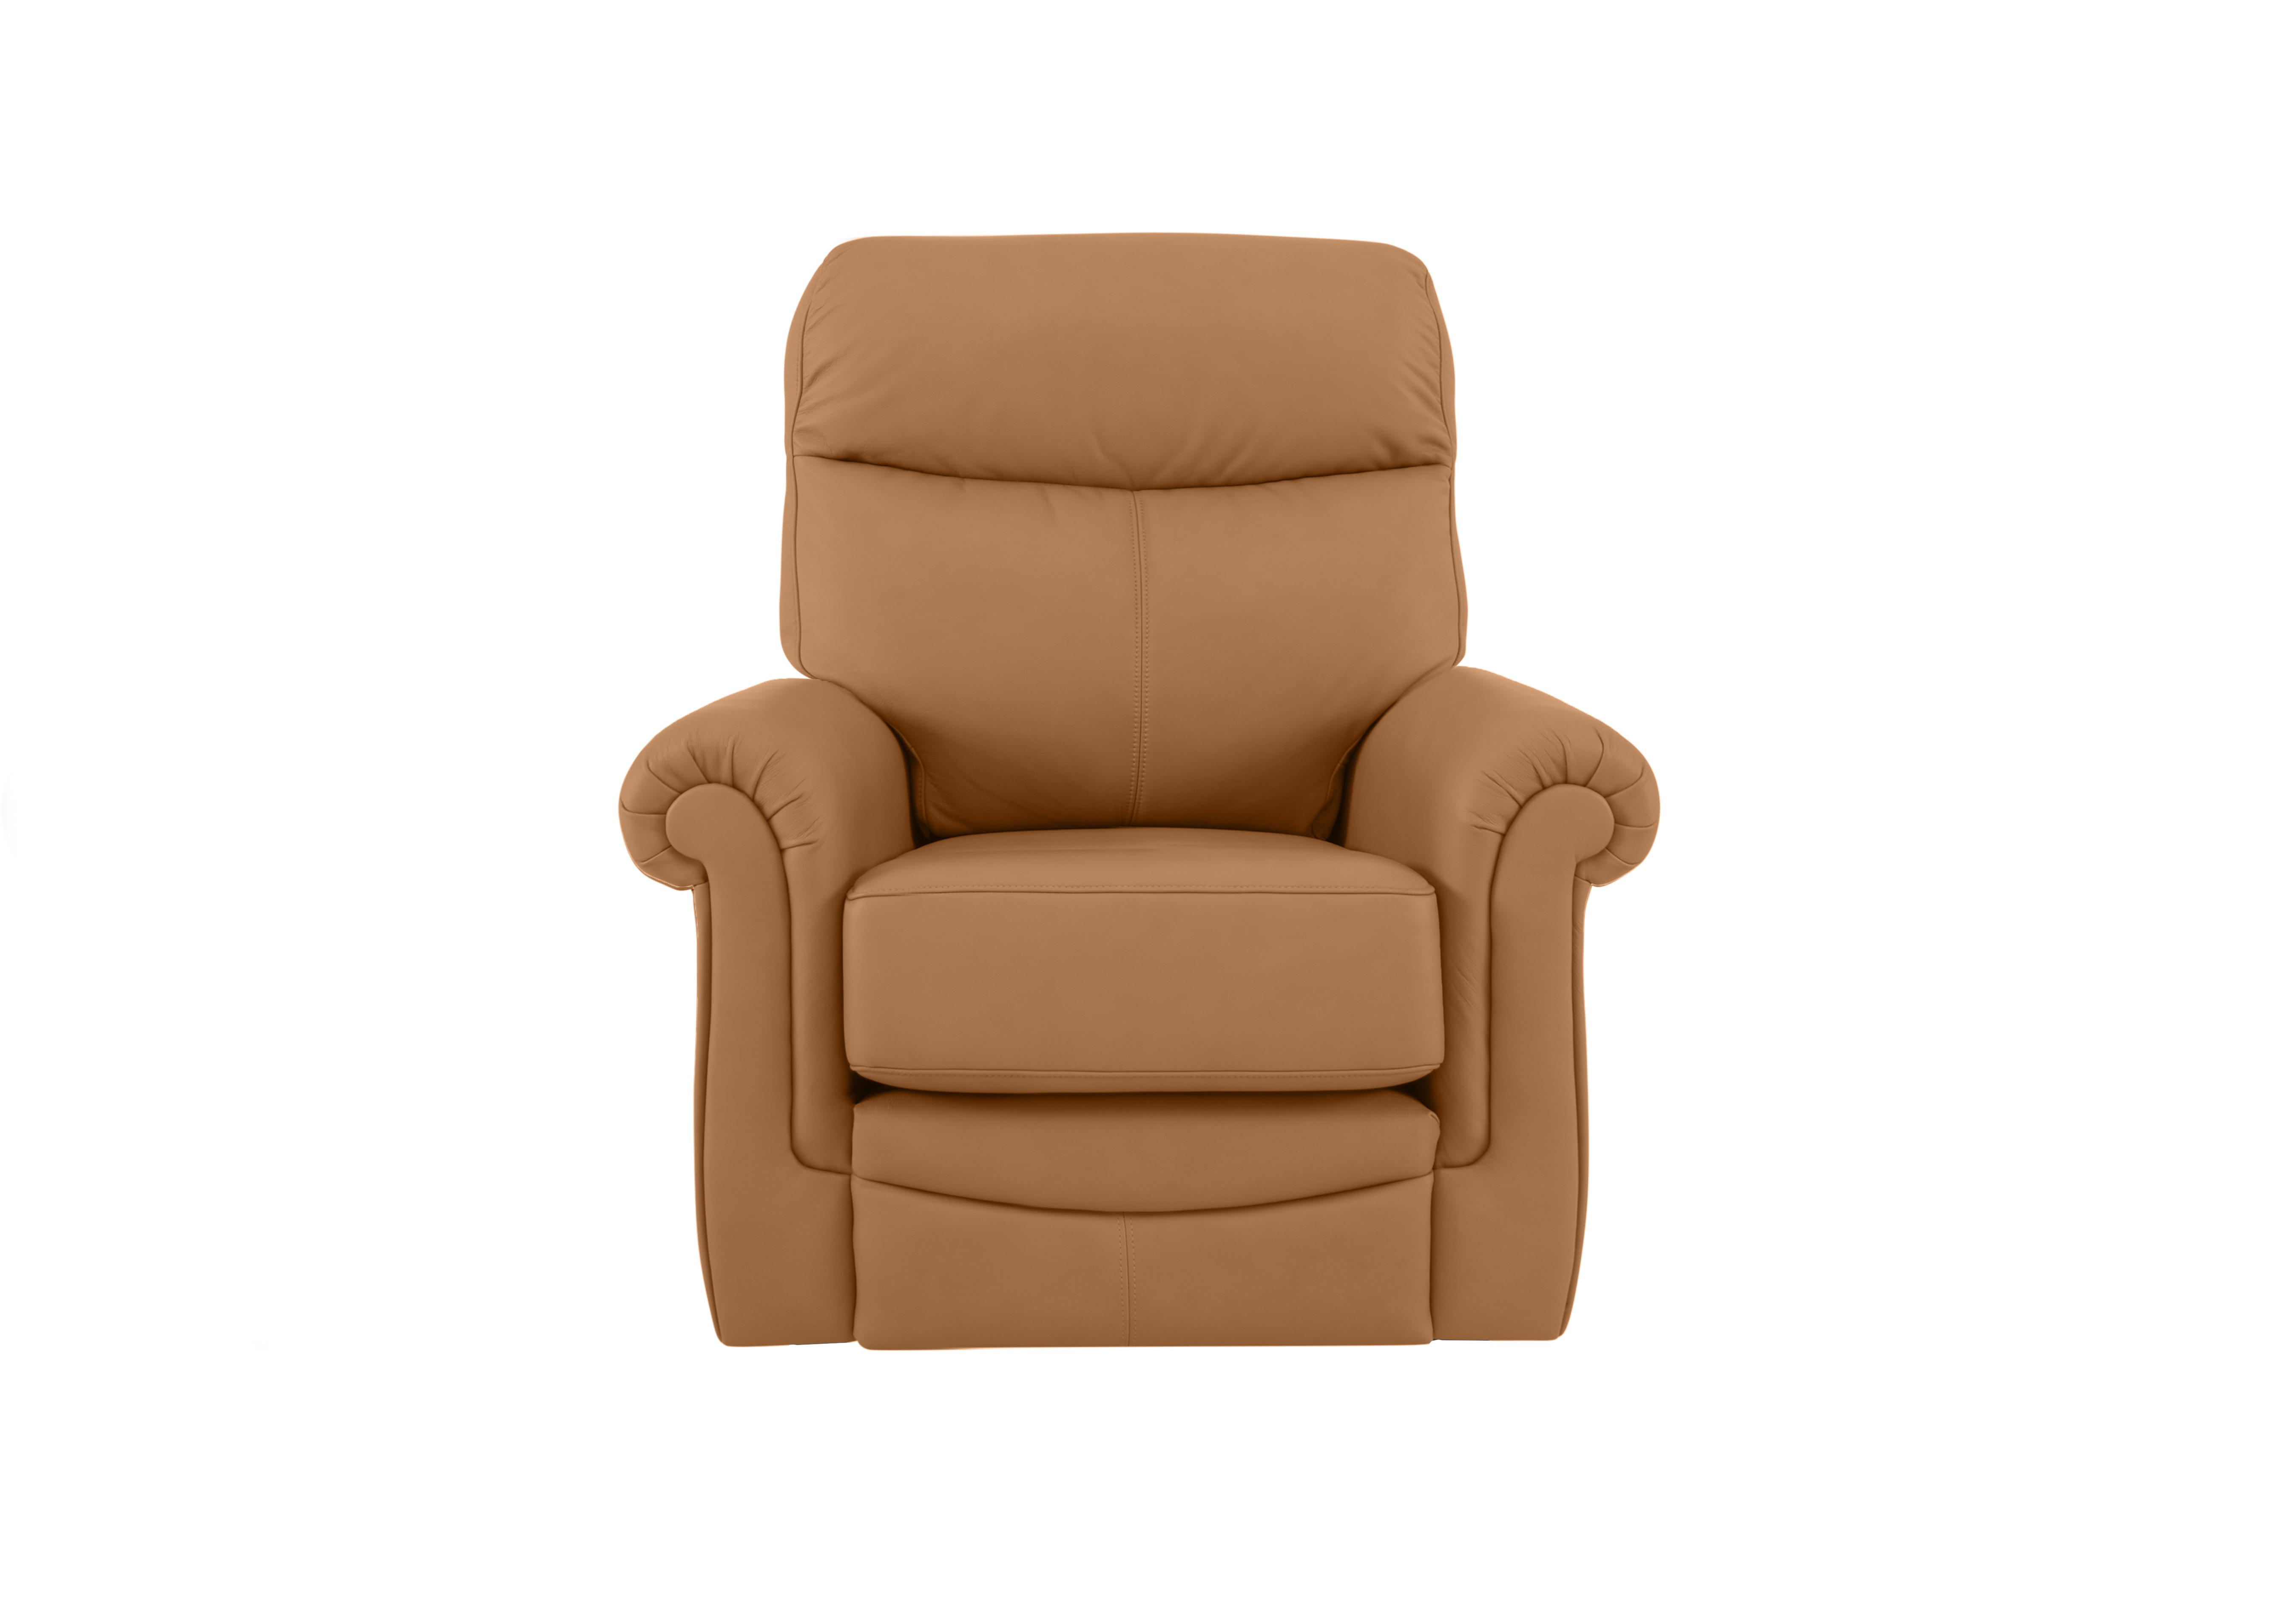 Avon Leather Lift and Rise Recliner Armchair in L847 Cambridge Tan on Furniture Village